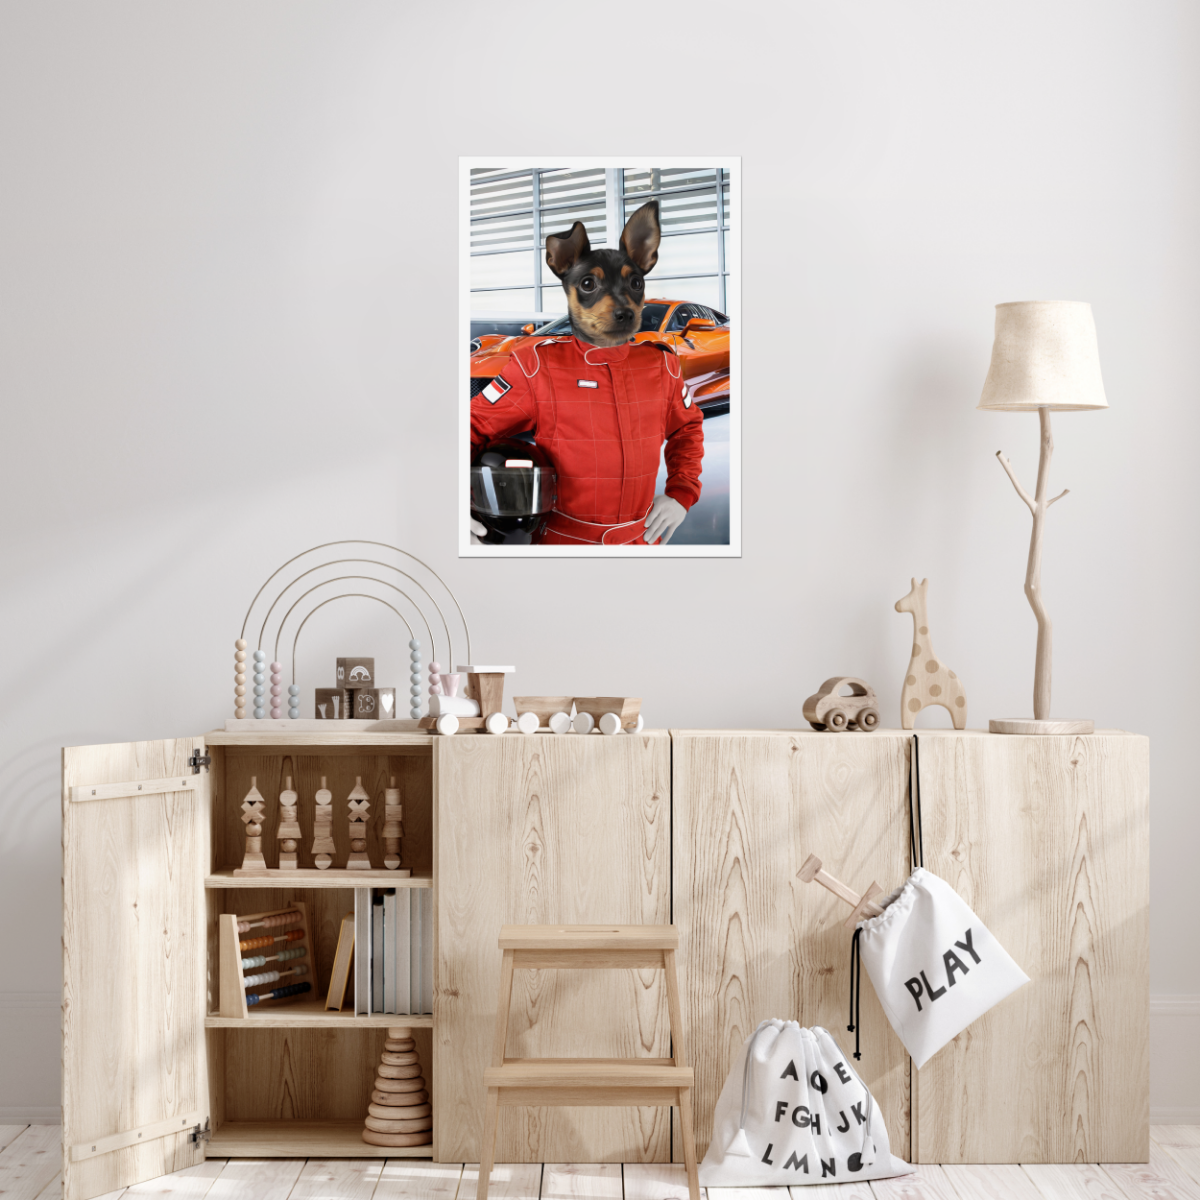 The Nascar Racer: Custom Pet Poster - Paw & Glory - #pet portraits# - #dog portraits# - #pet portraits uk#Paw & Glory, paw and glory, professional pet photos, painting of your dog, funny dog paintings, small dog portrait, dog portrait background colors, custom dog painting, pet portraits